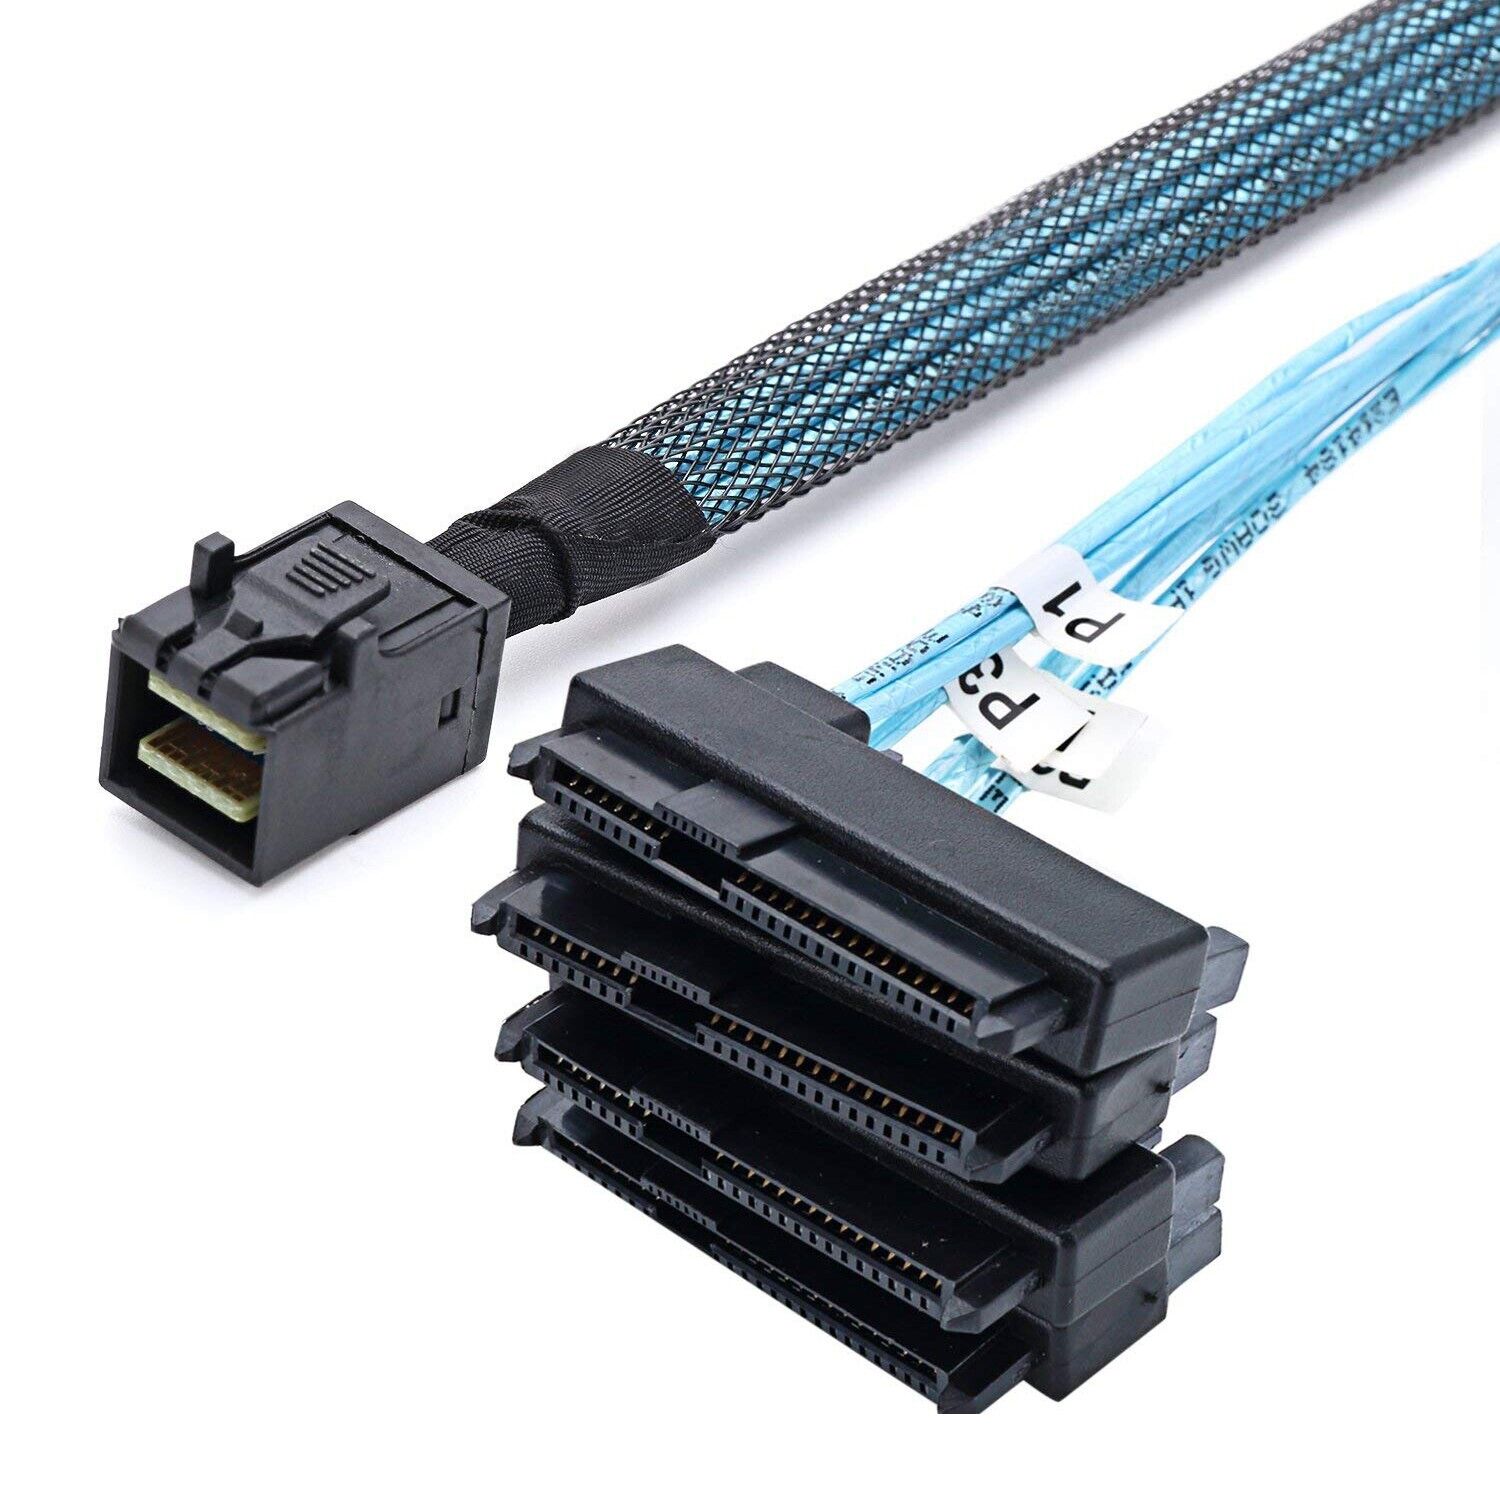 P82C Mini SAS SFF-8643 to 4x 29pin SFF-8482 and 4x SATA 15pin Splitter Cable 1m